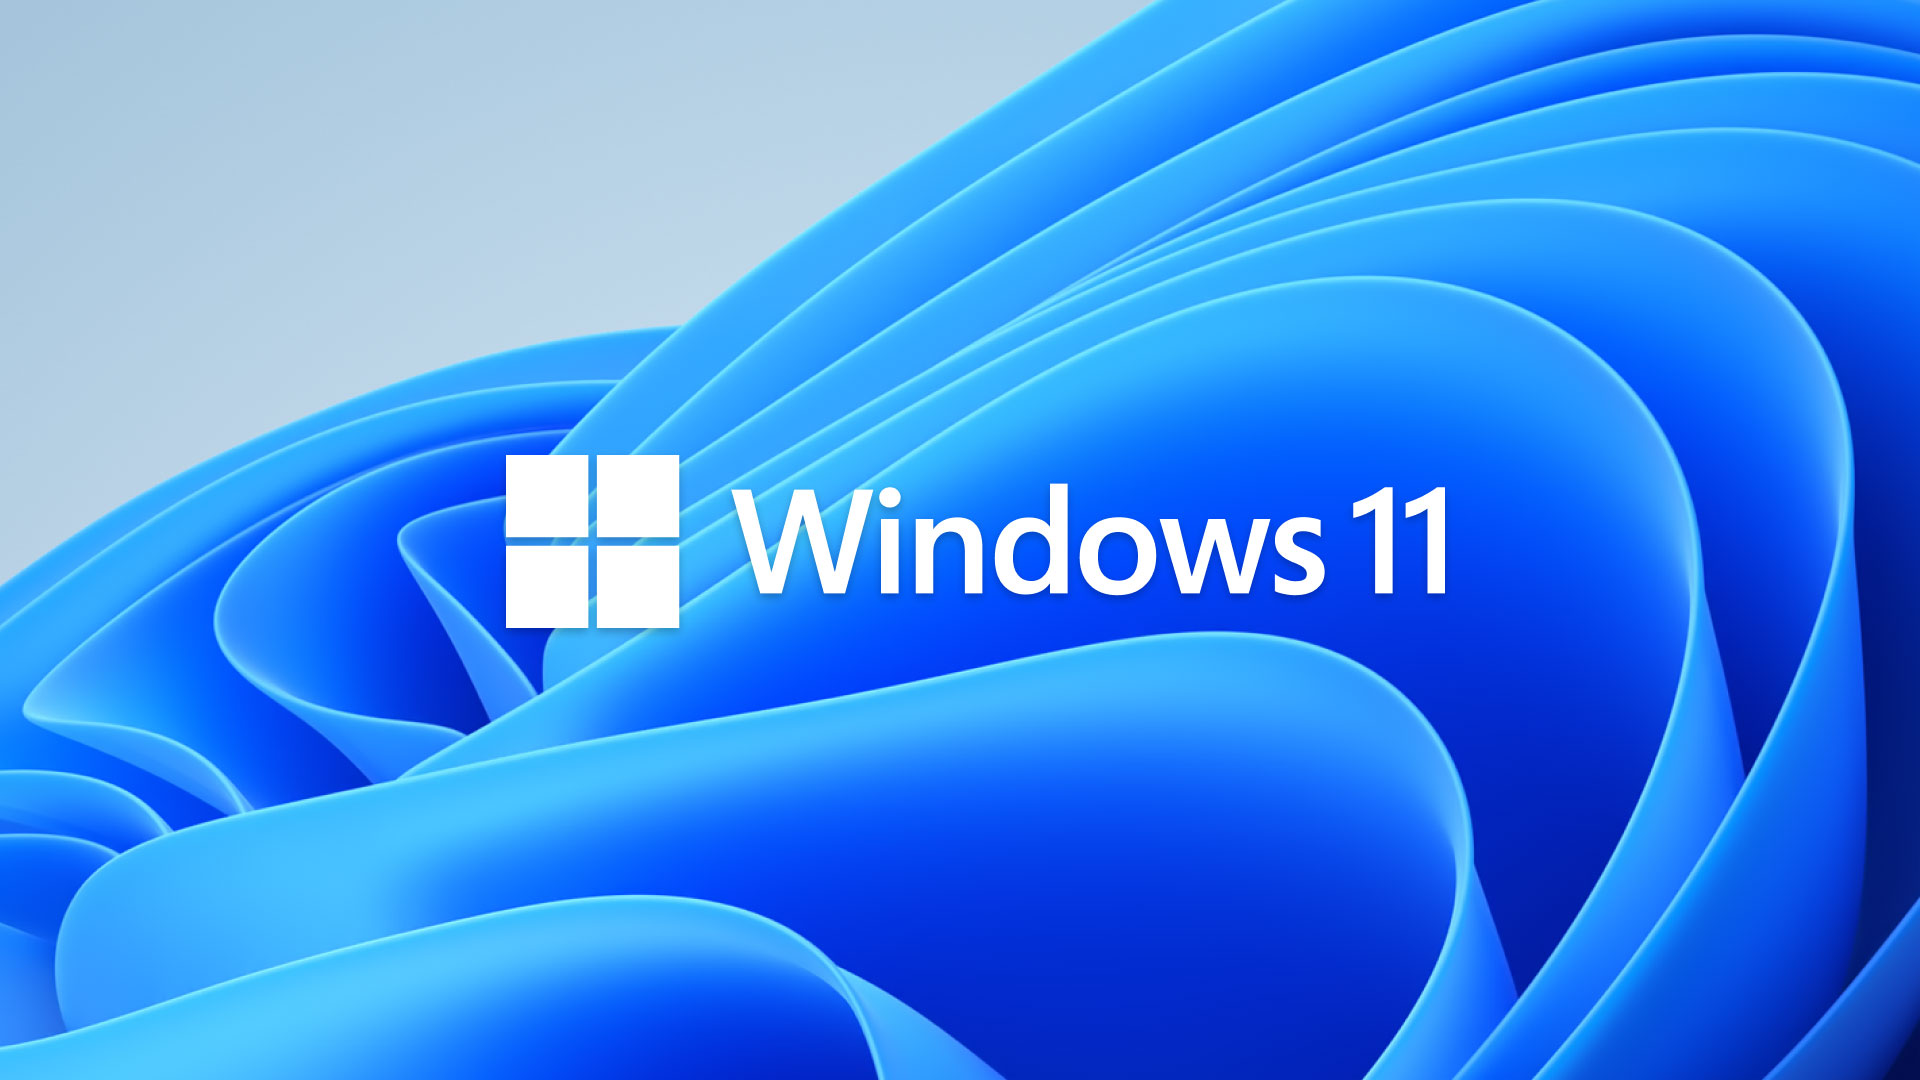 Windows 11 announcement: features, release date, price, and more - EnD ...